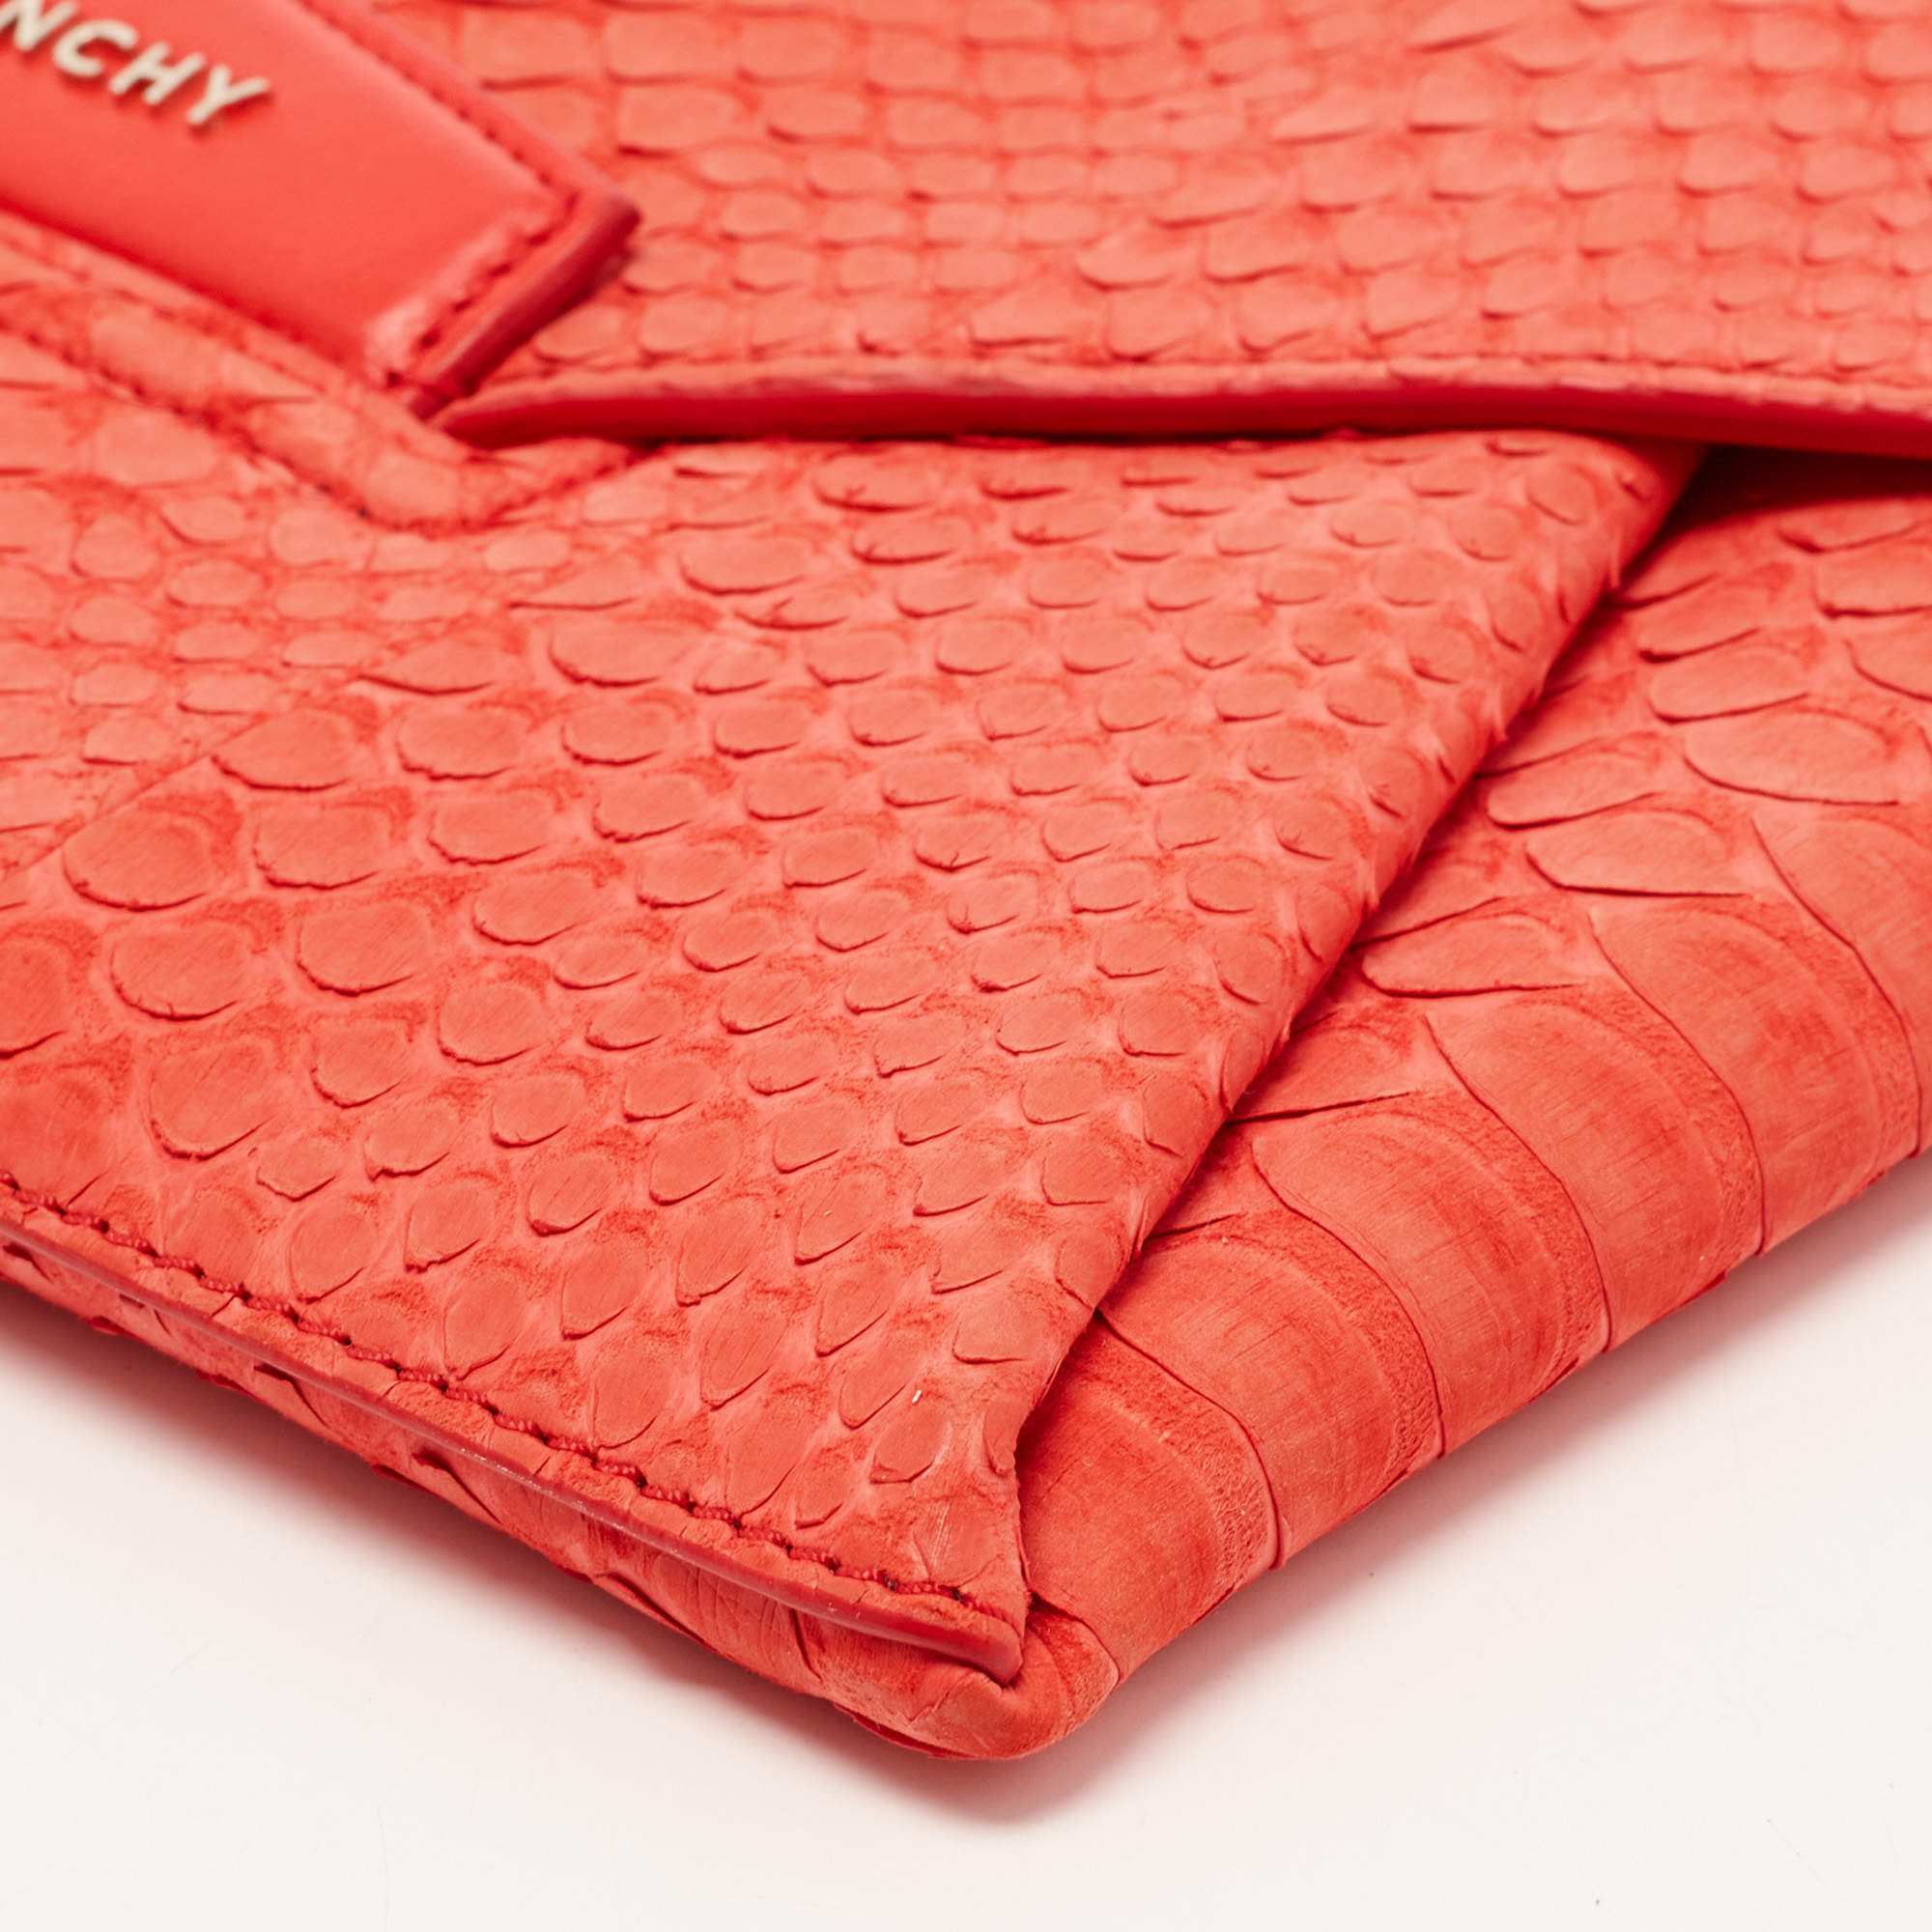 Givenchy Givenchy Antigona hand clutch in red leather ref.995772